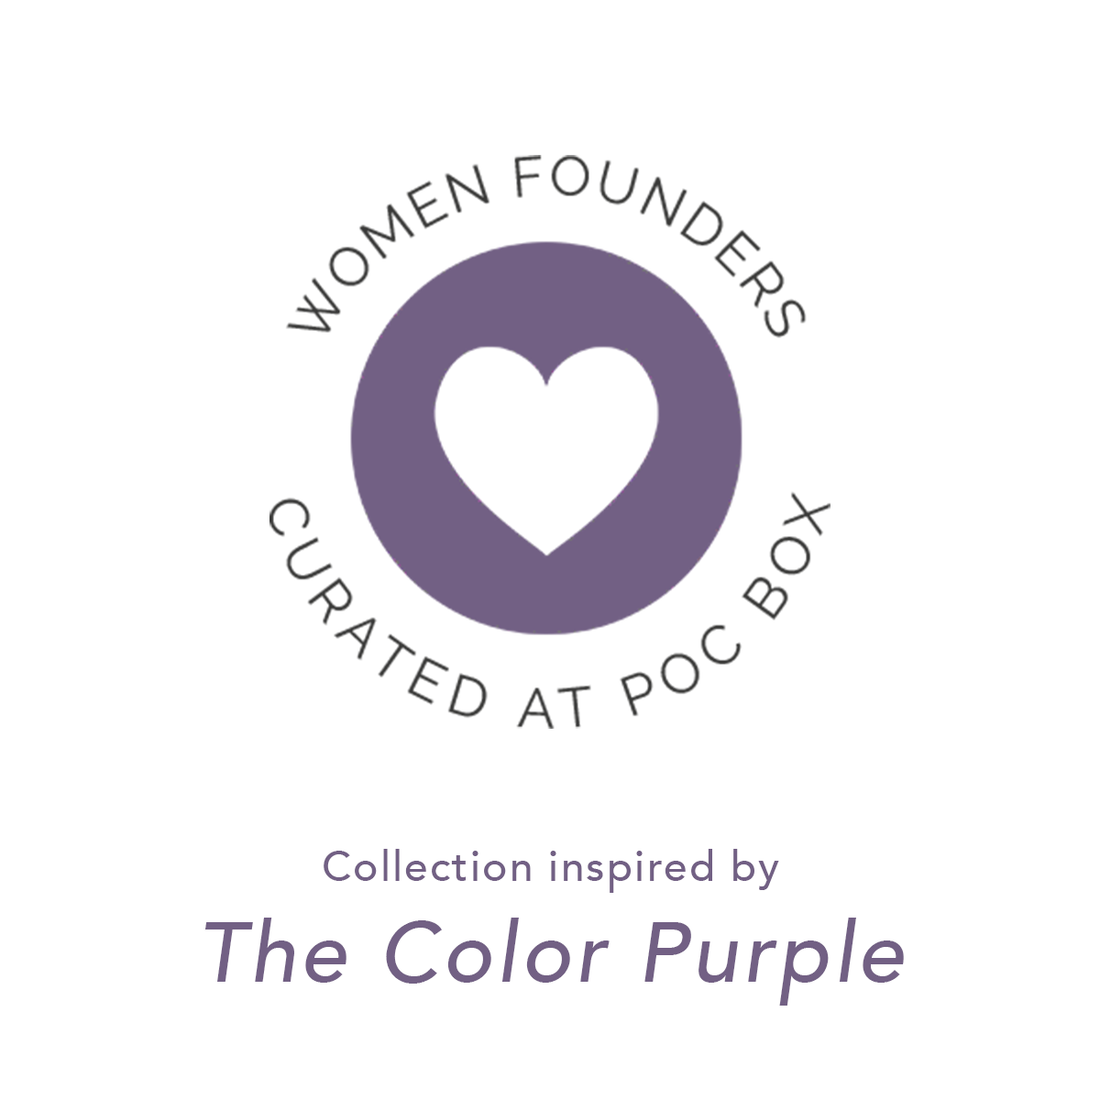  Women Founded Collection